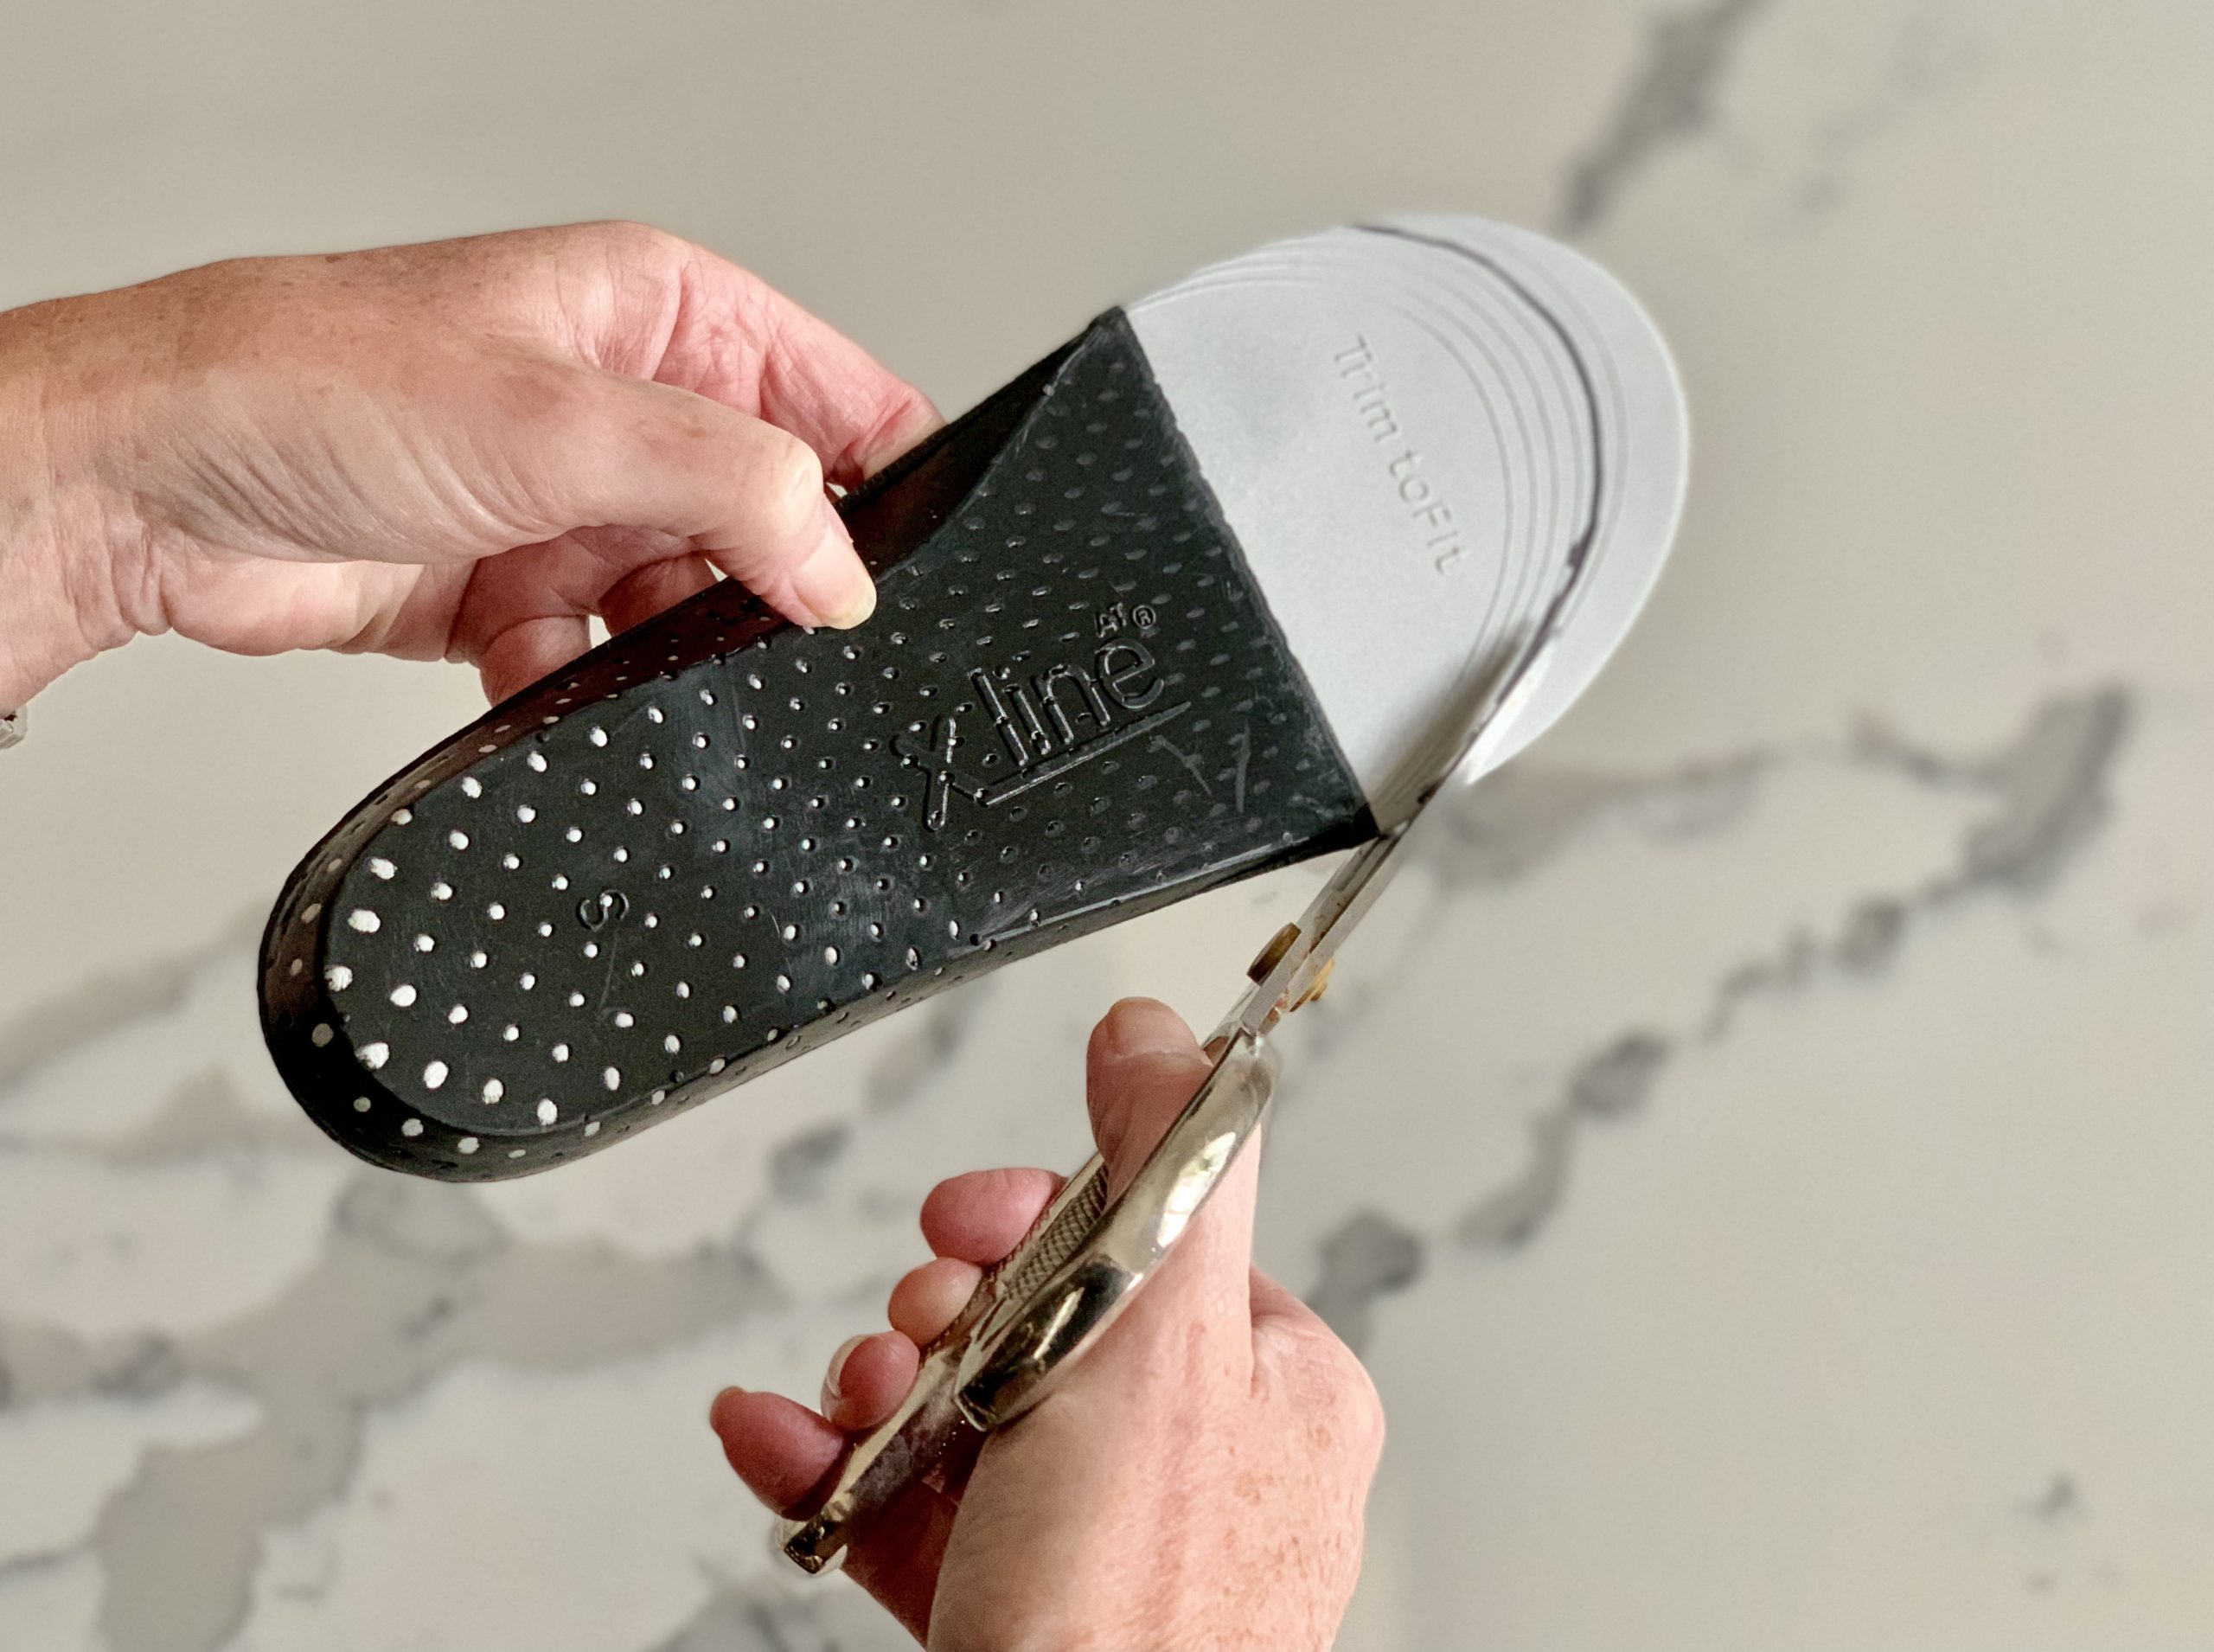 How to Use Insoles and Put Them in Shoes - Healthy Step